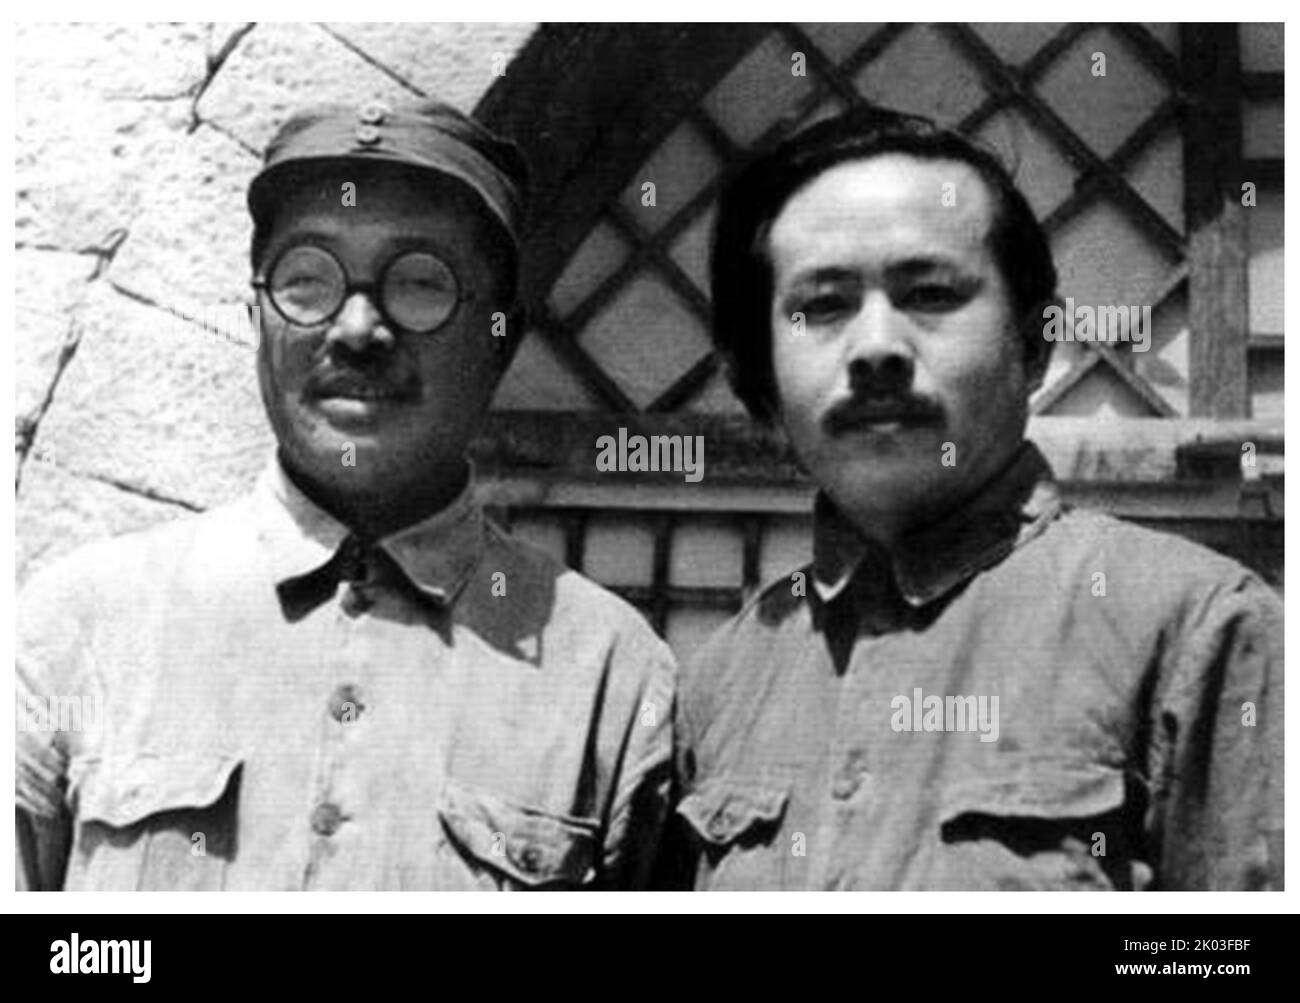 He Long and Ren Bishi together during the Seventh National Congress of the Communist Party of China in 1945. Ren Bishi was a military and political leader in the early Chinese Communist Party. In the early 1930s, Stock Photo